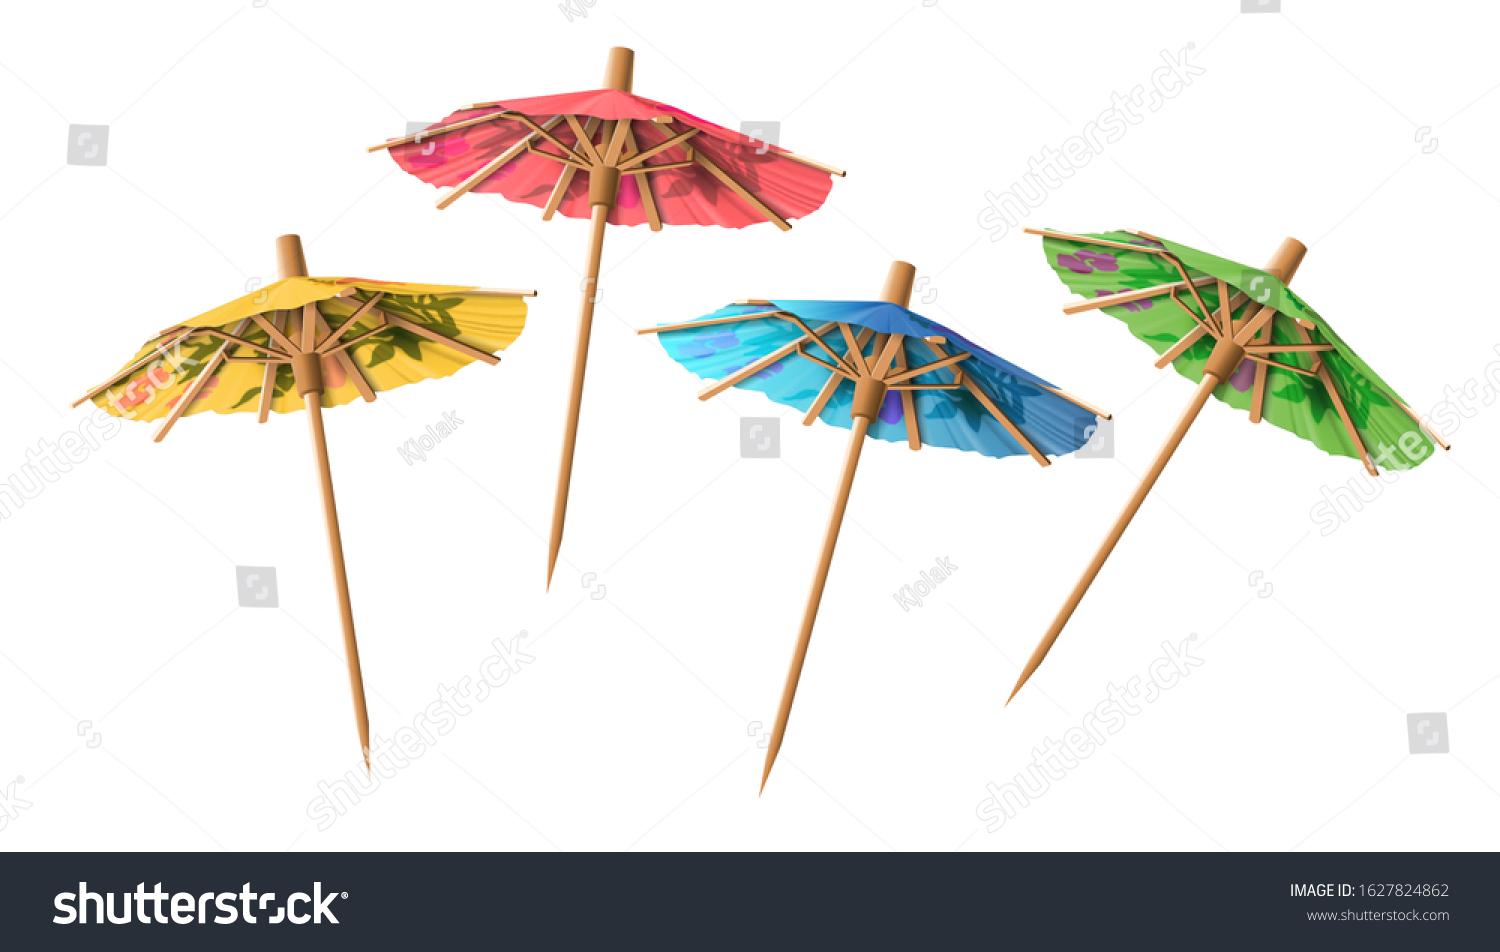 SVG of Set of four cocktail umbrellas of different colors on a white background. Highly realistic illustration. svg